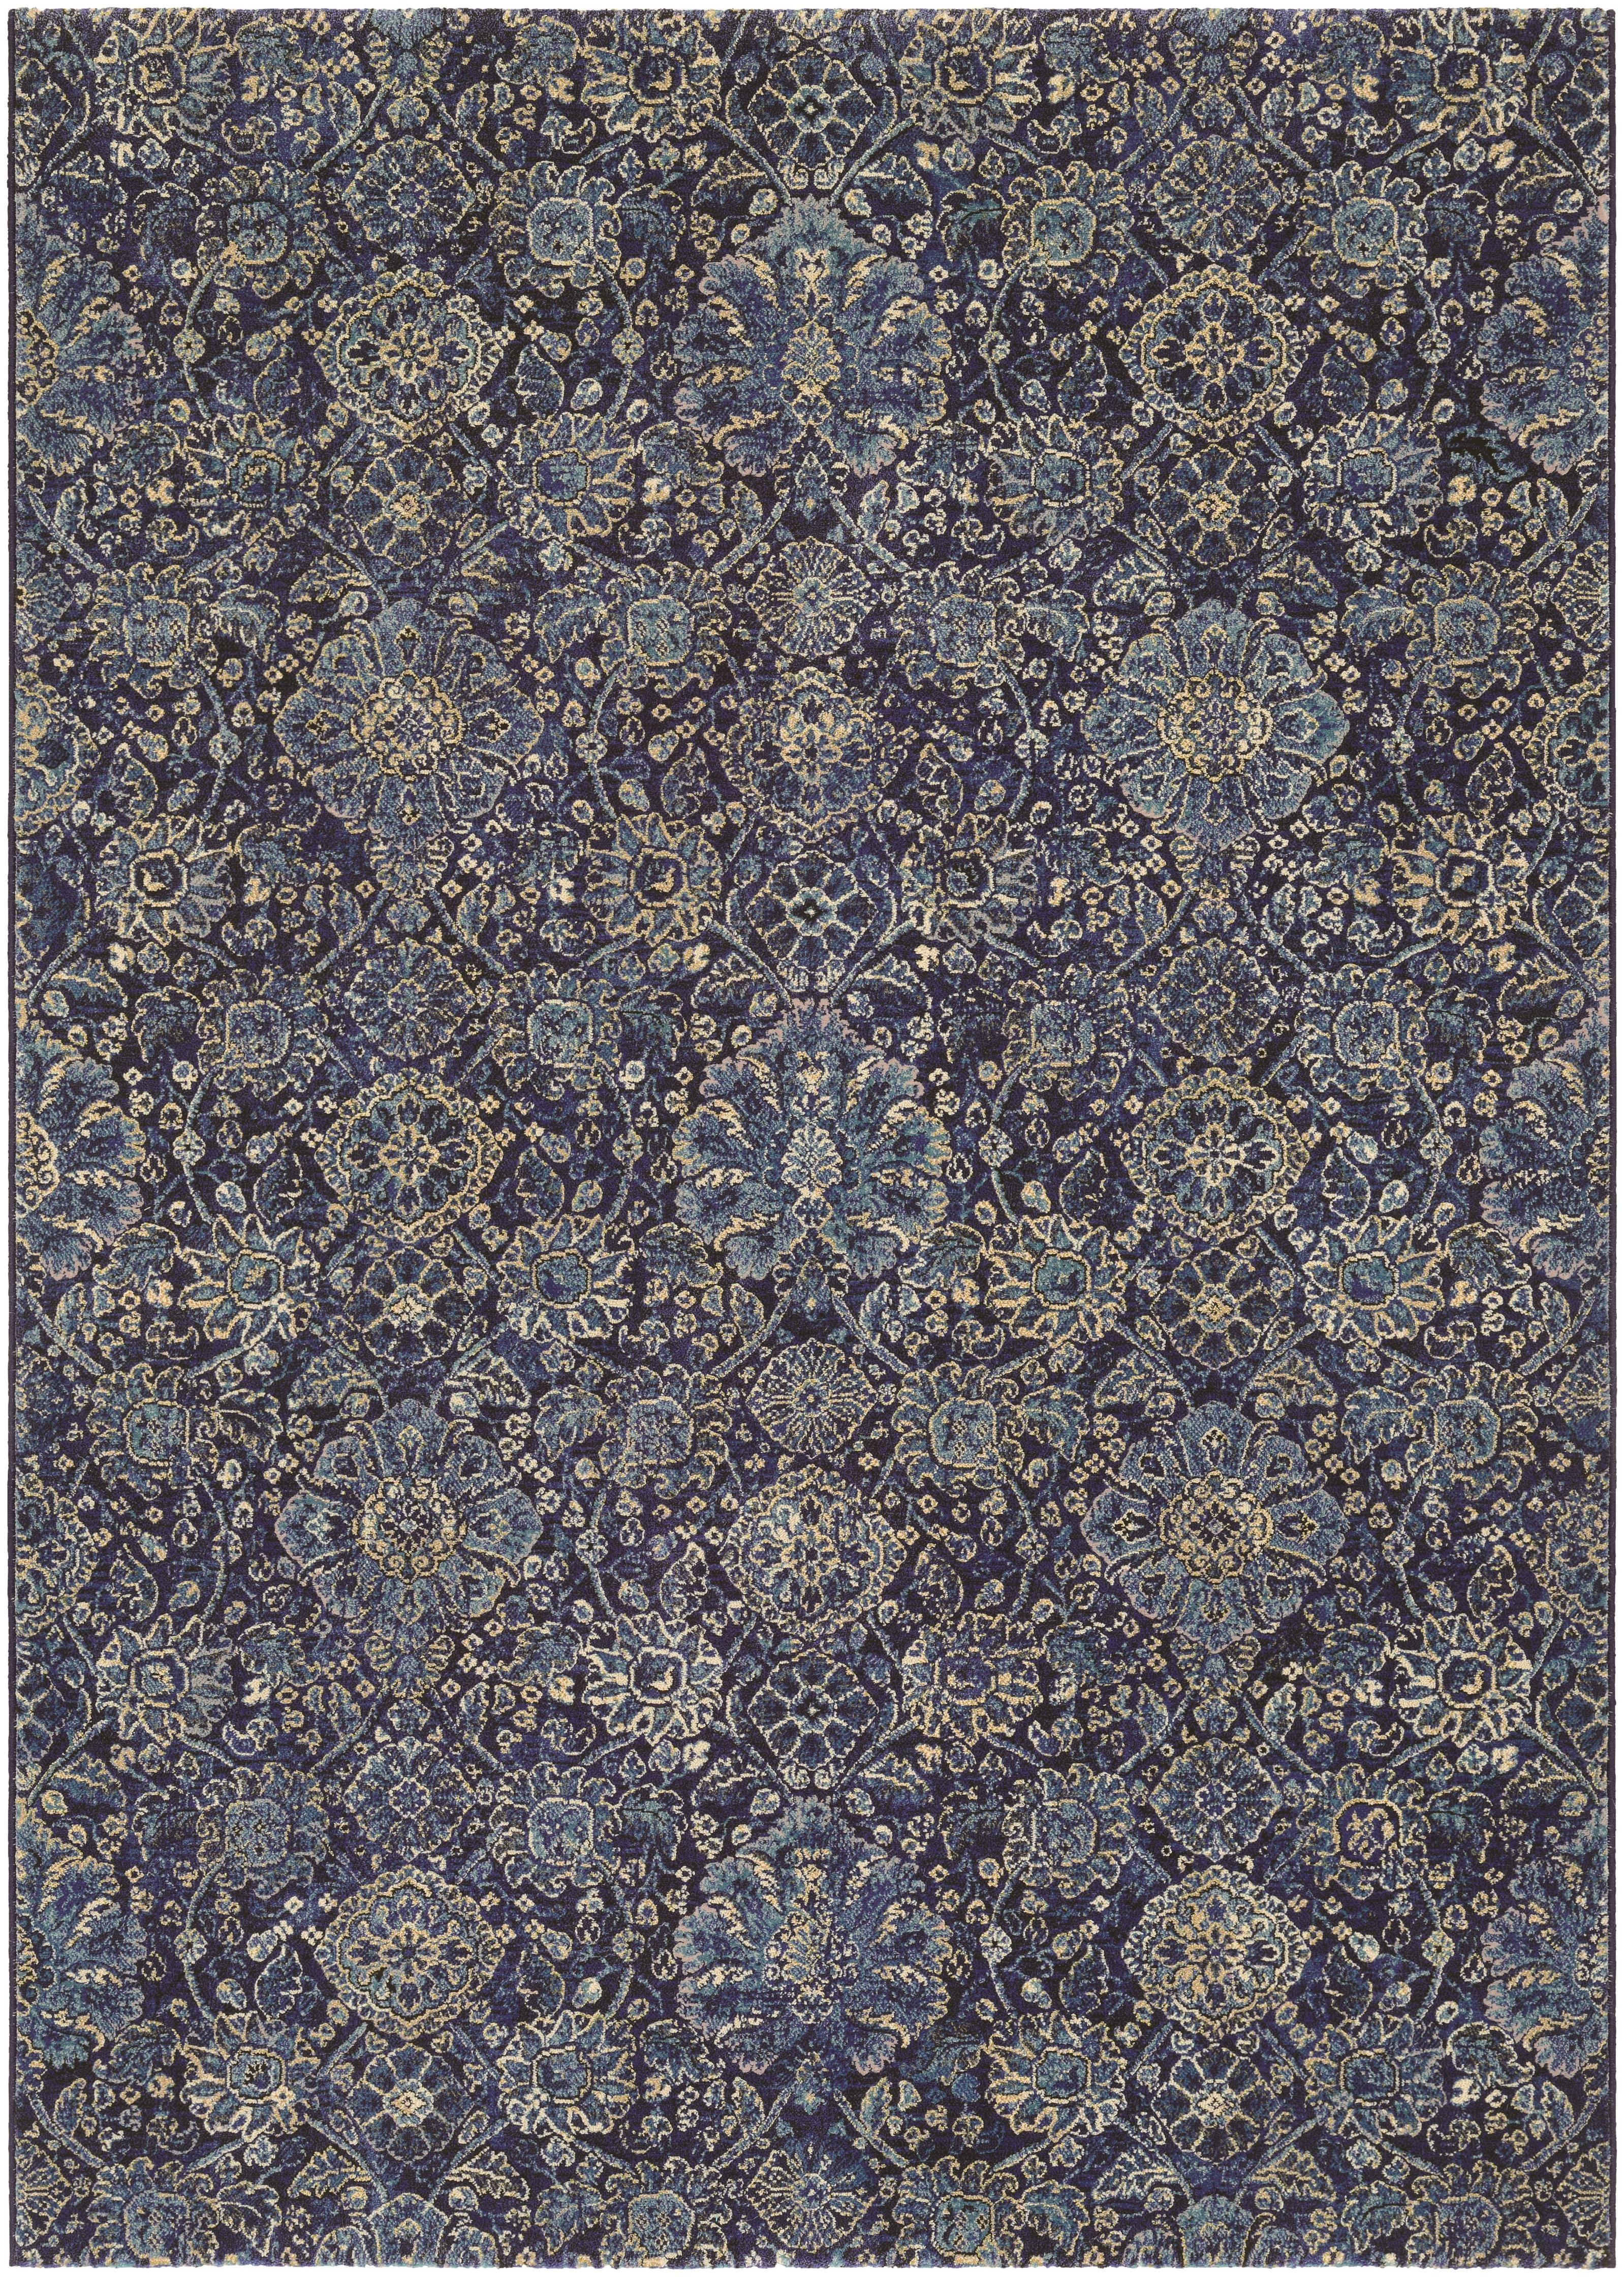 Easton Transitional Navy-Sapphire Washable Area Rug, 2' x 3'7"